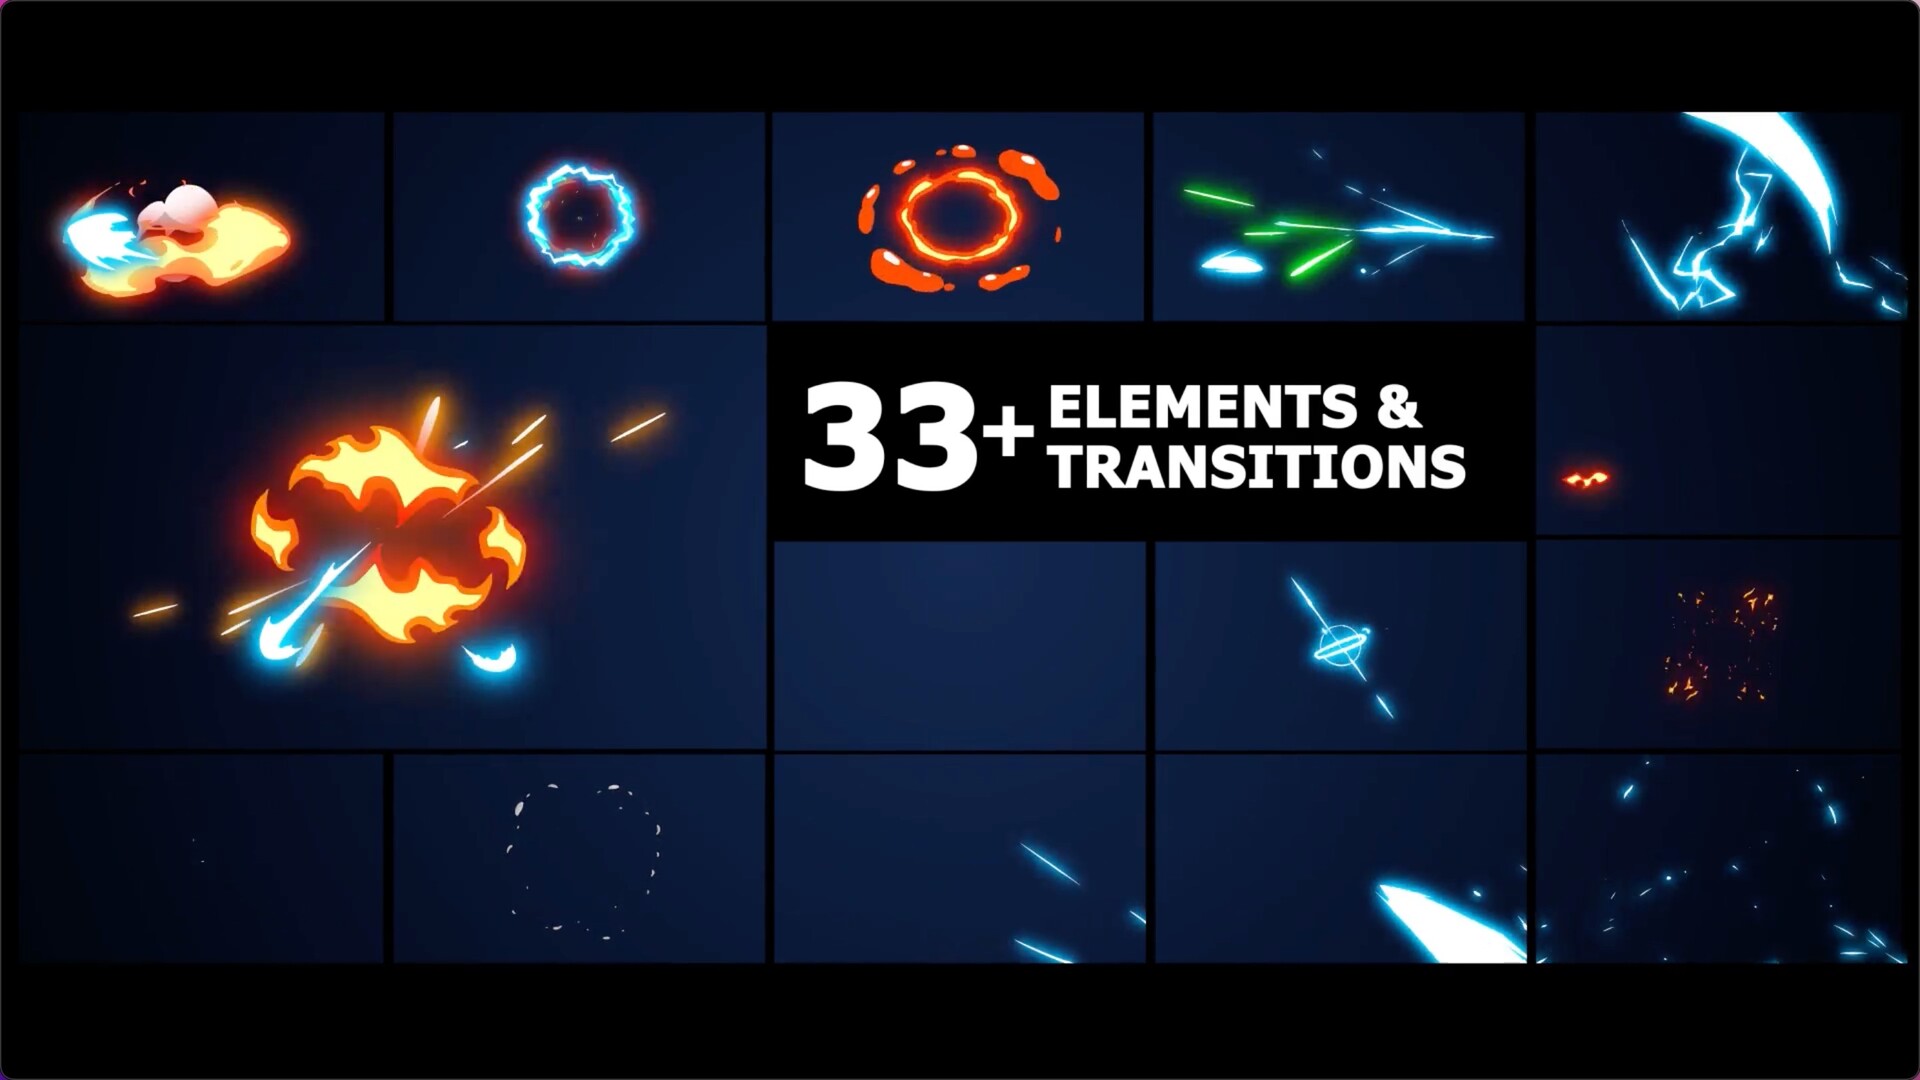 FCPX插件：卡通爆炸电力元素效果Elements And Transitions for Mac